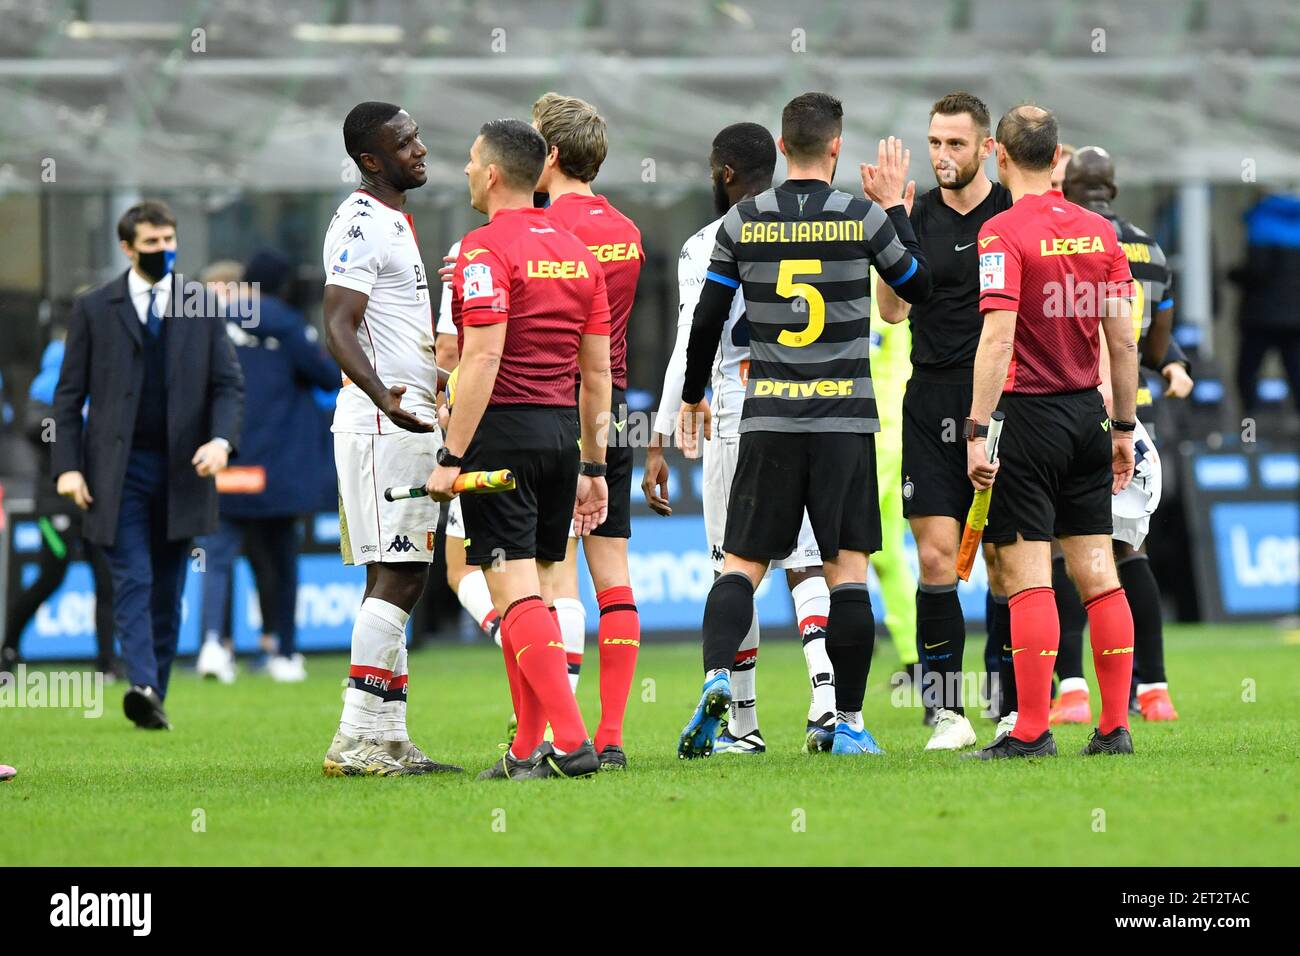 Milano, Italy. 28th, February 2021. Cristian Zapata (2) of Genoa seen with referee Daniele Chiffi after the Serie A match between Inter Milan and Genoa at Giuseppe Meazza in Milano. (Photo credit: Gonzales Photo - Tommaso Fimiano). Stock Photo